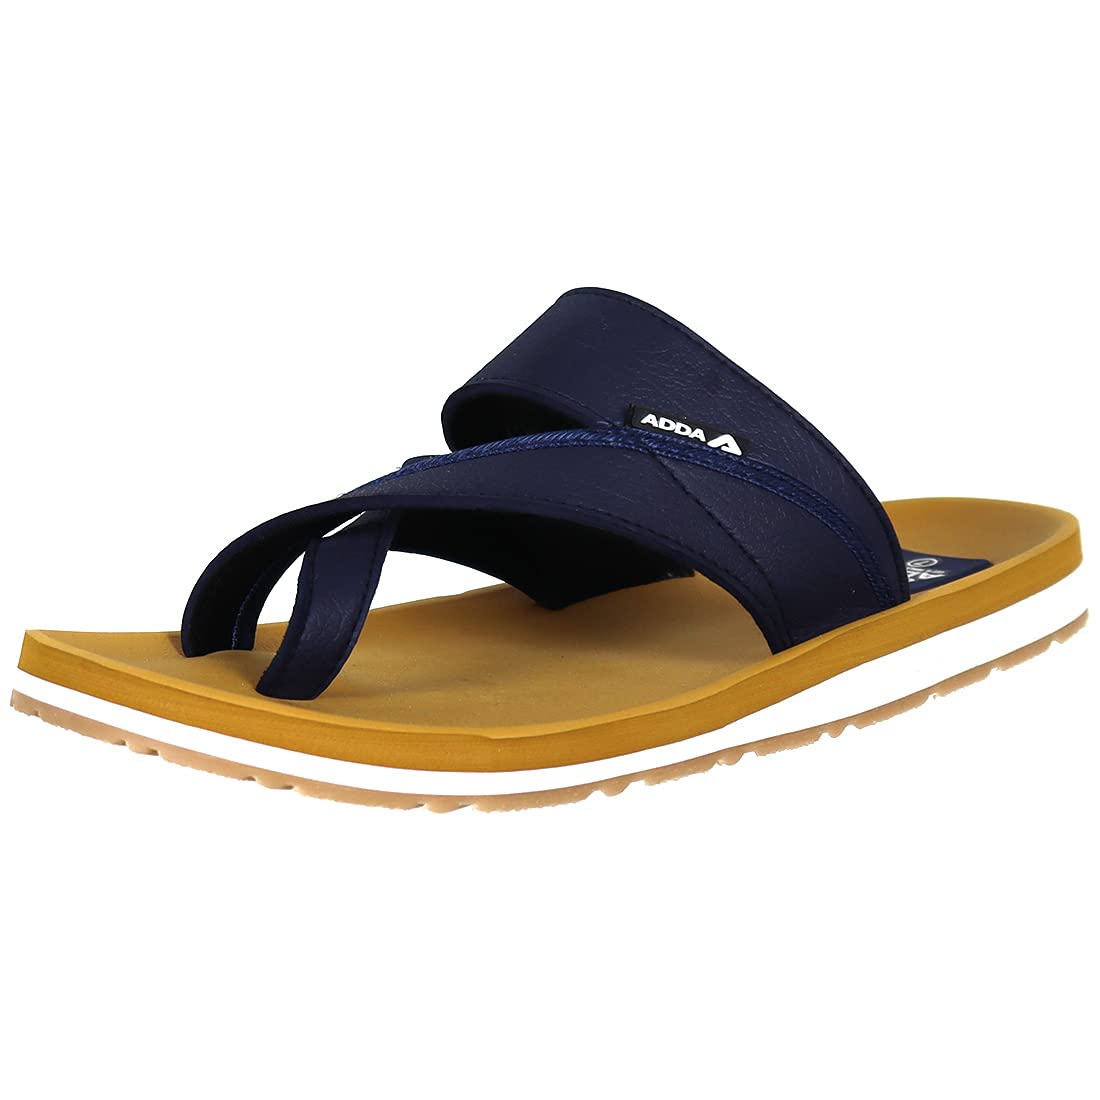 Buy Adda Slippers & Flip Flops Online at Best Price | Myntra-tuongthan.vn